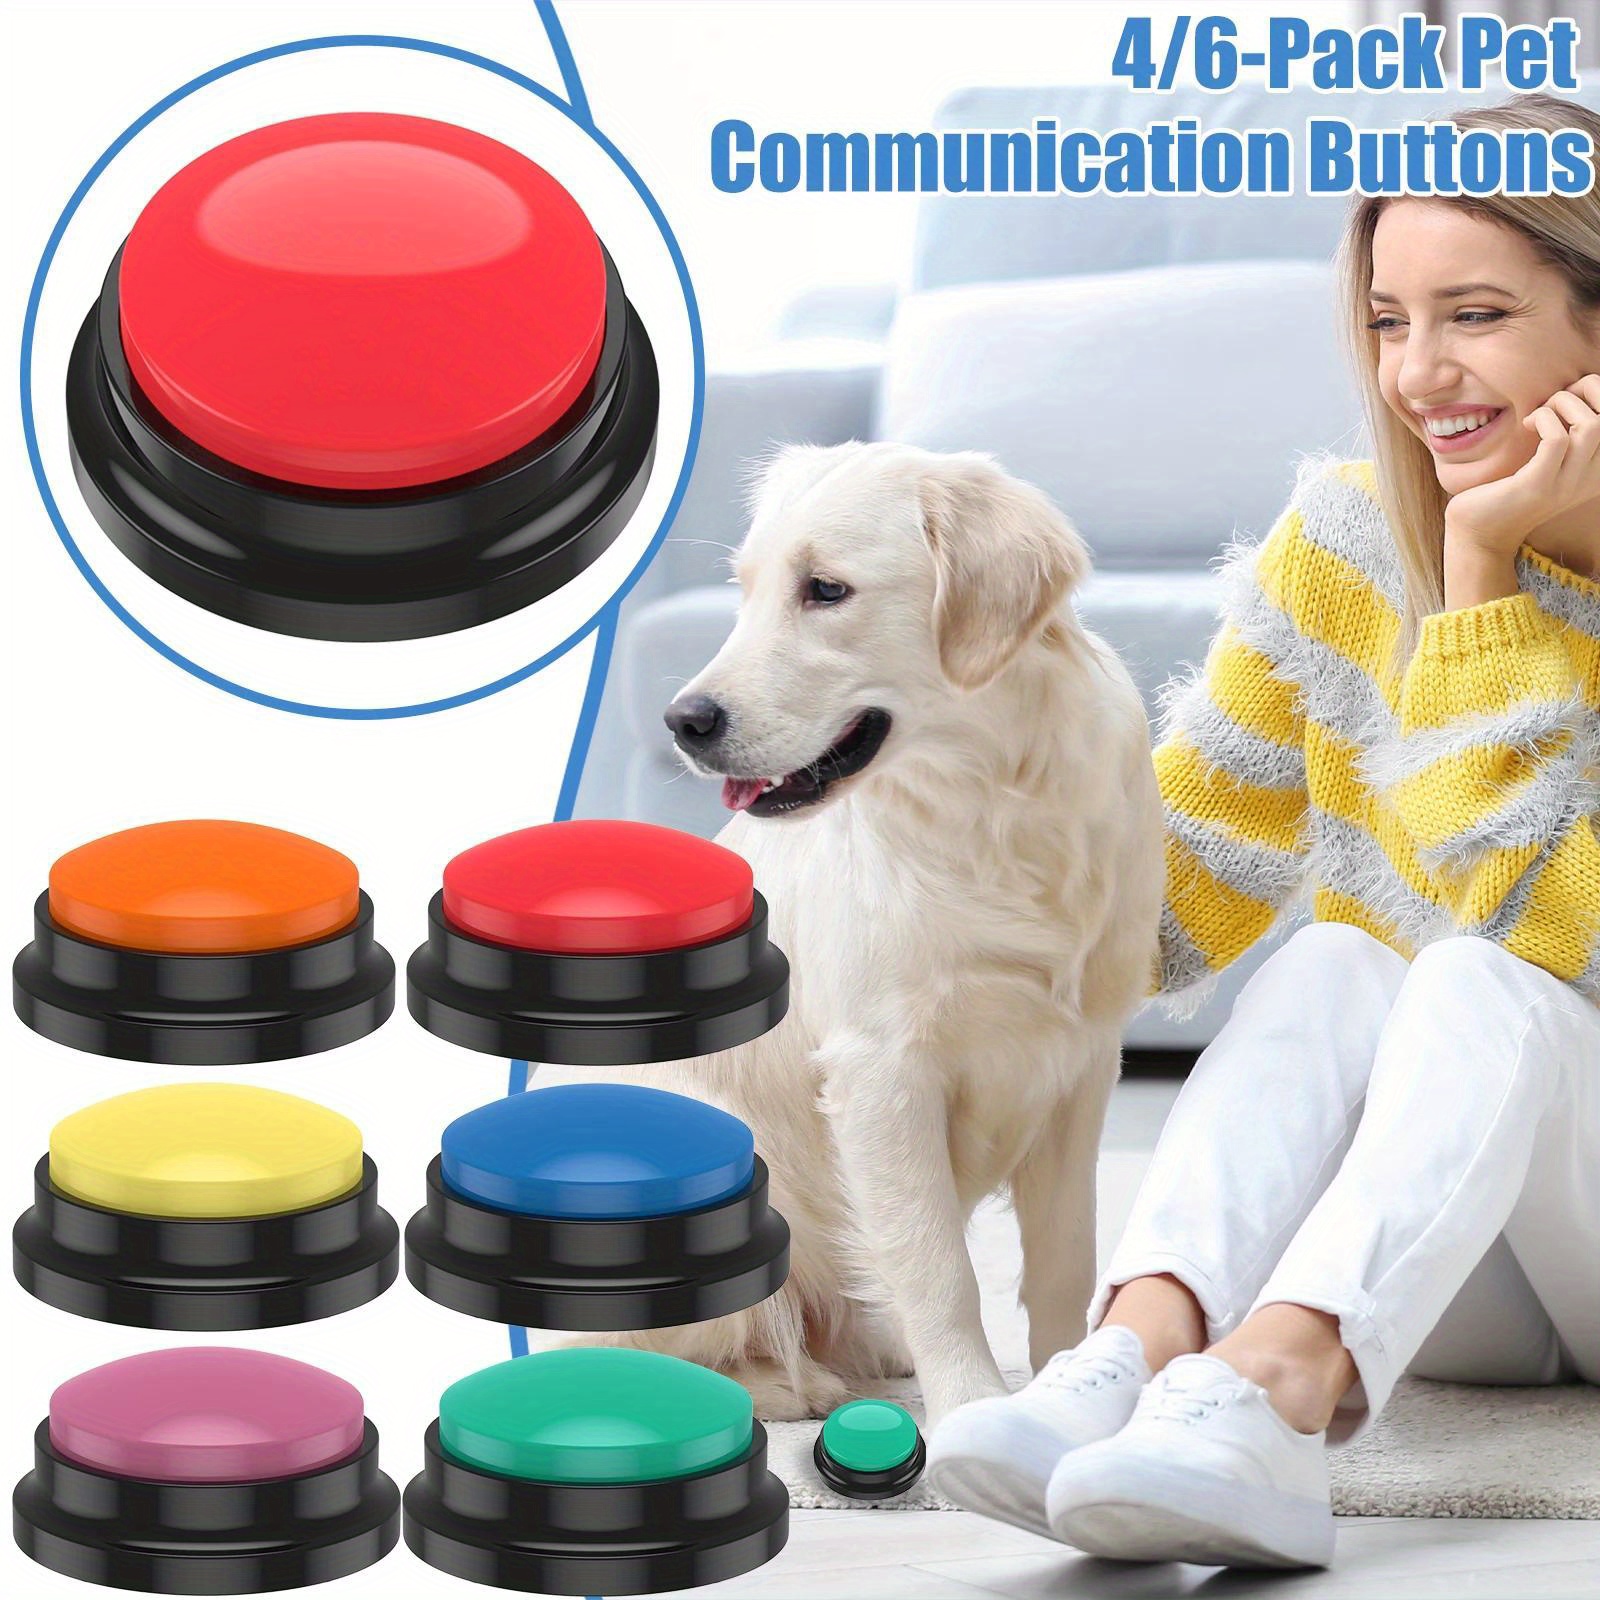 

4/6pcs Recordable Dog Training Buttons With Light, Pet Interactive Dog Cat Pet Training Buzzer Talking Button, Intelligence Toy